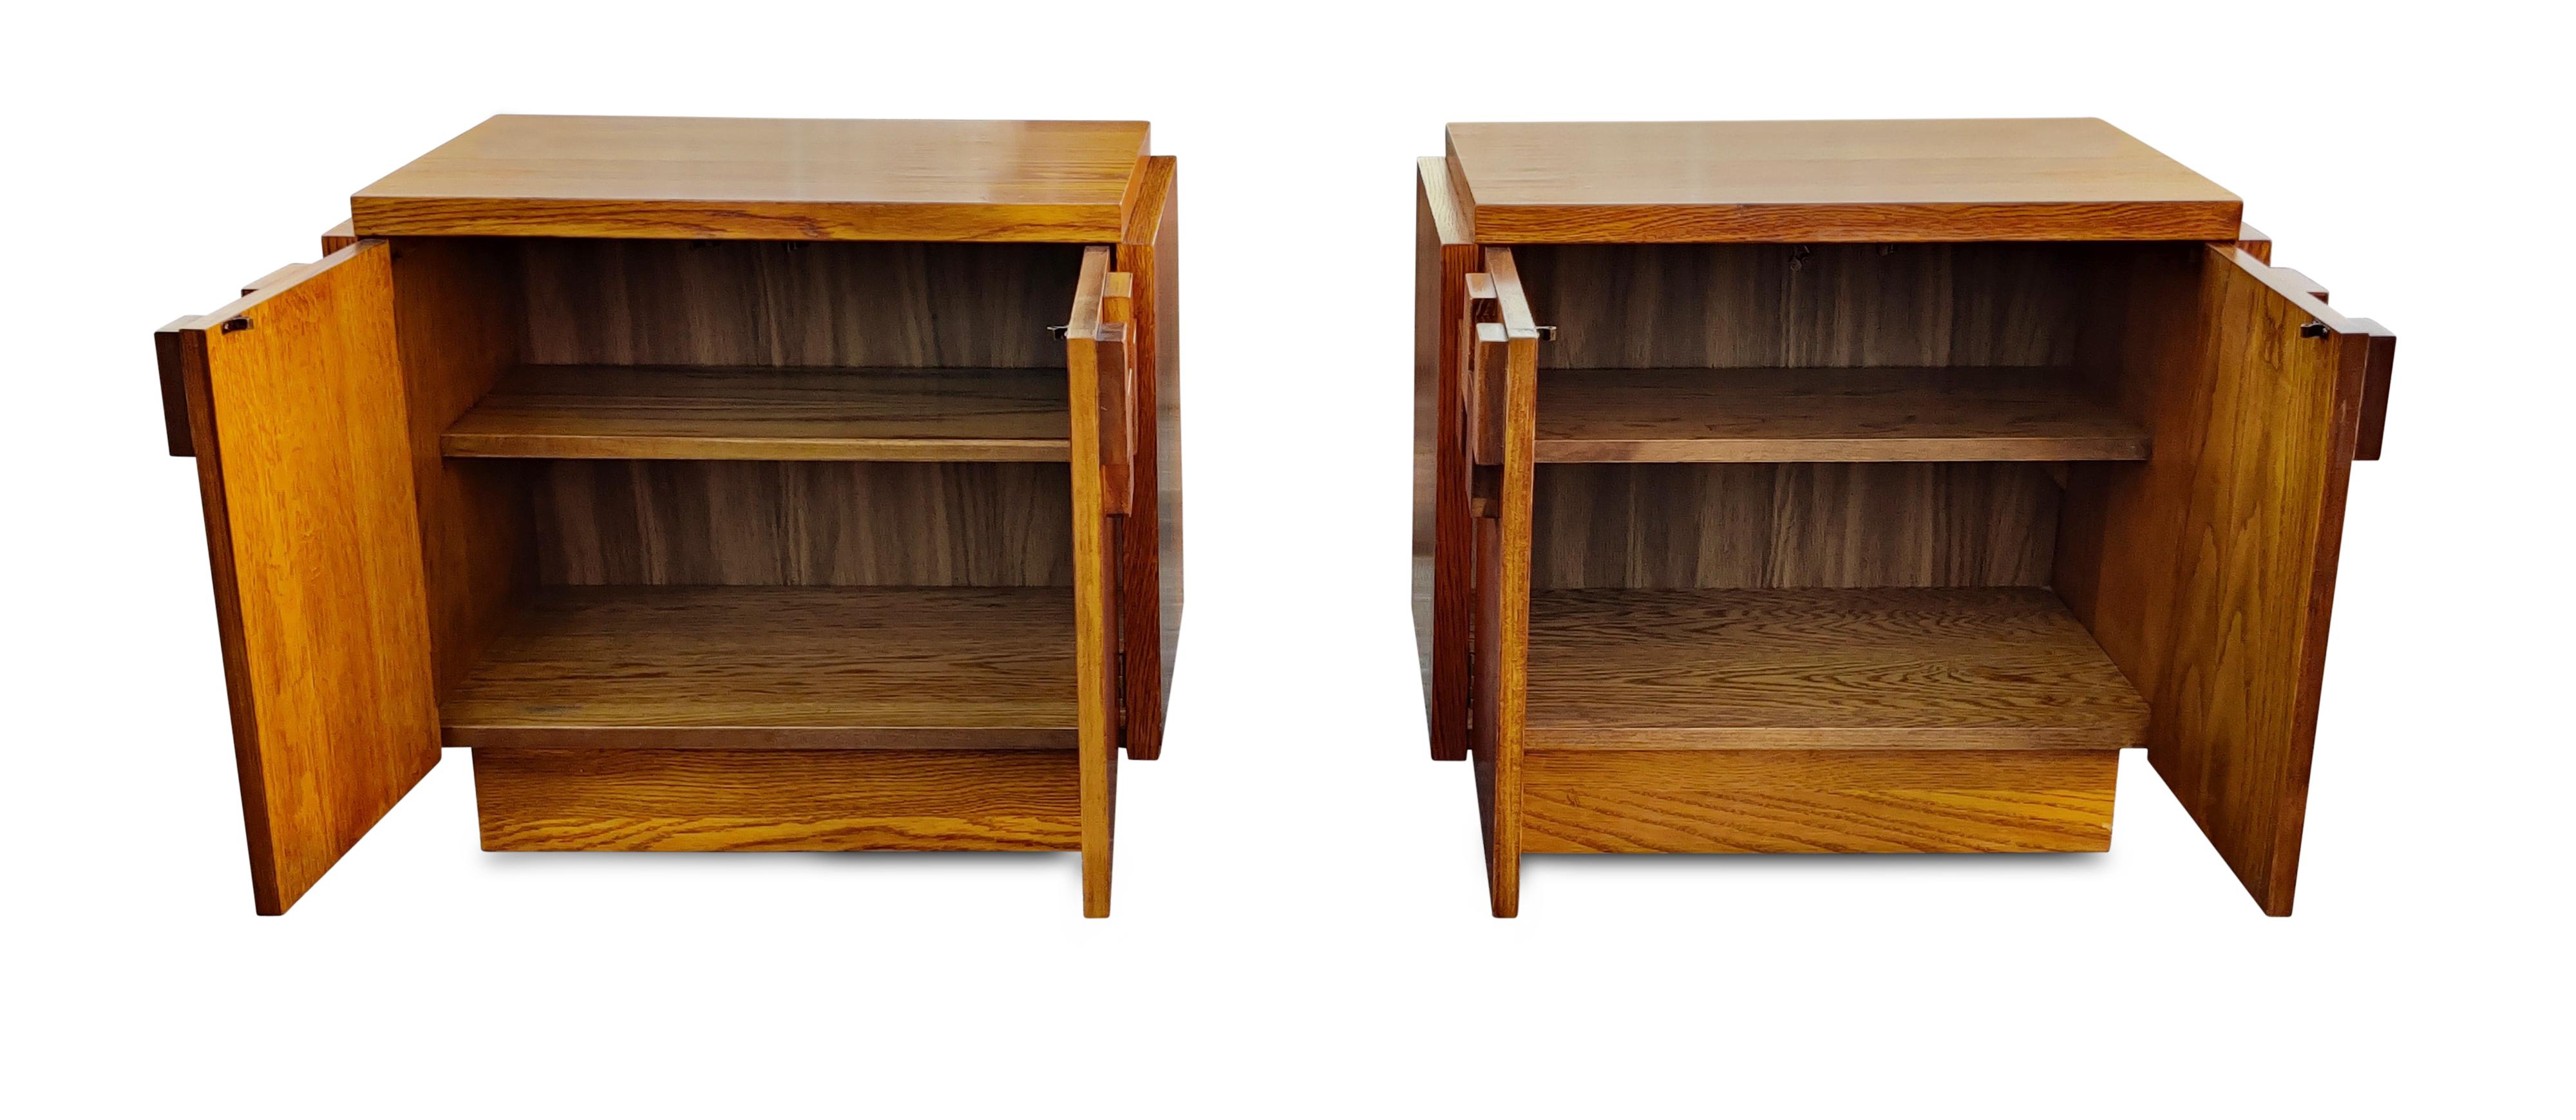 Burnished Vintage Paul Evans Style Lane Brutalist, Staccato or Mosaic Pair Oak Nightstands For Sale